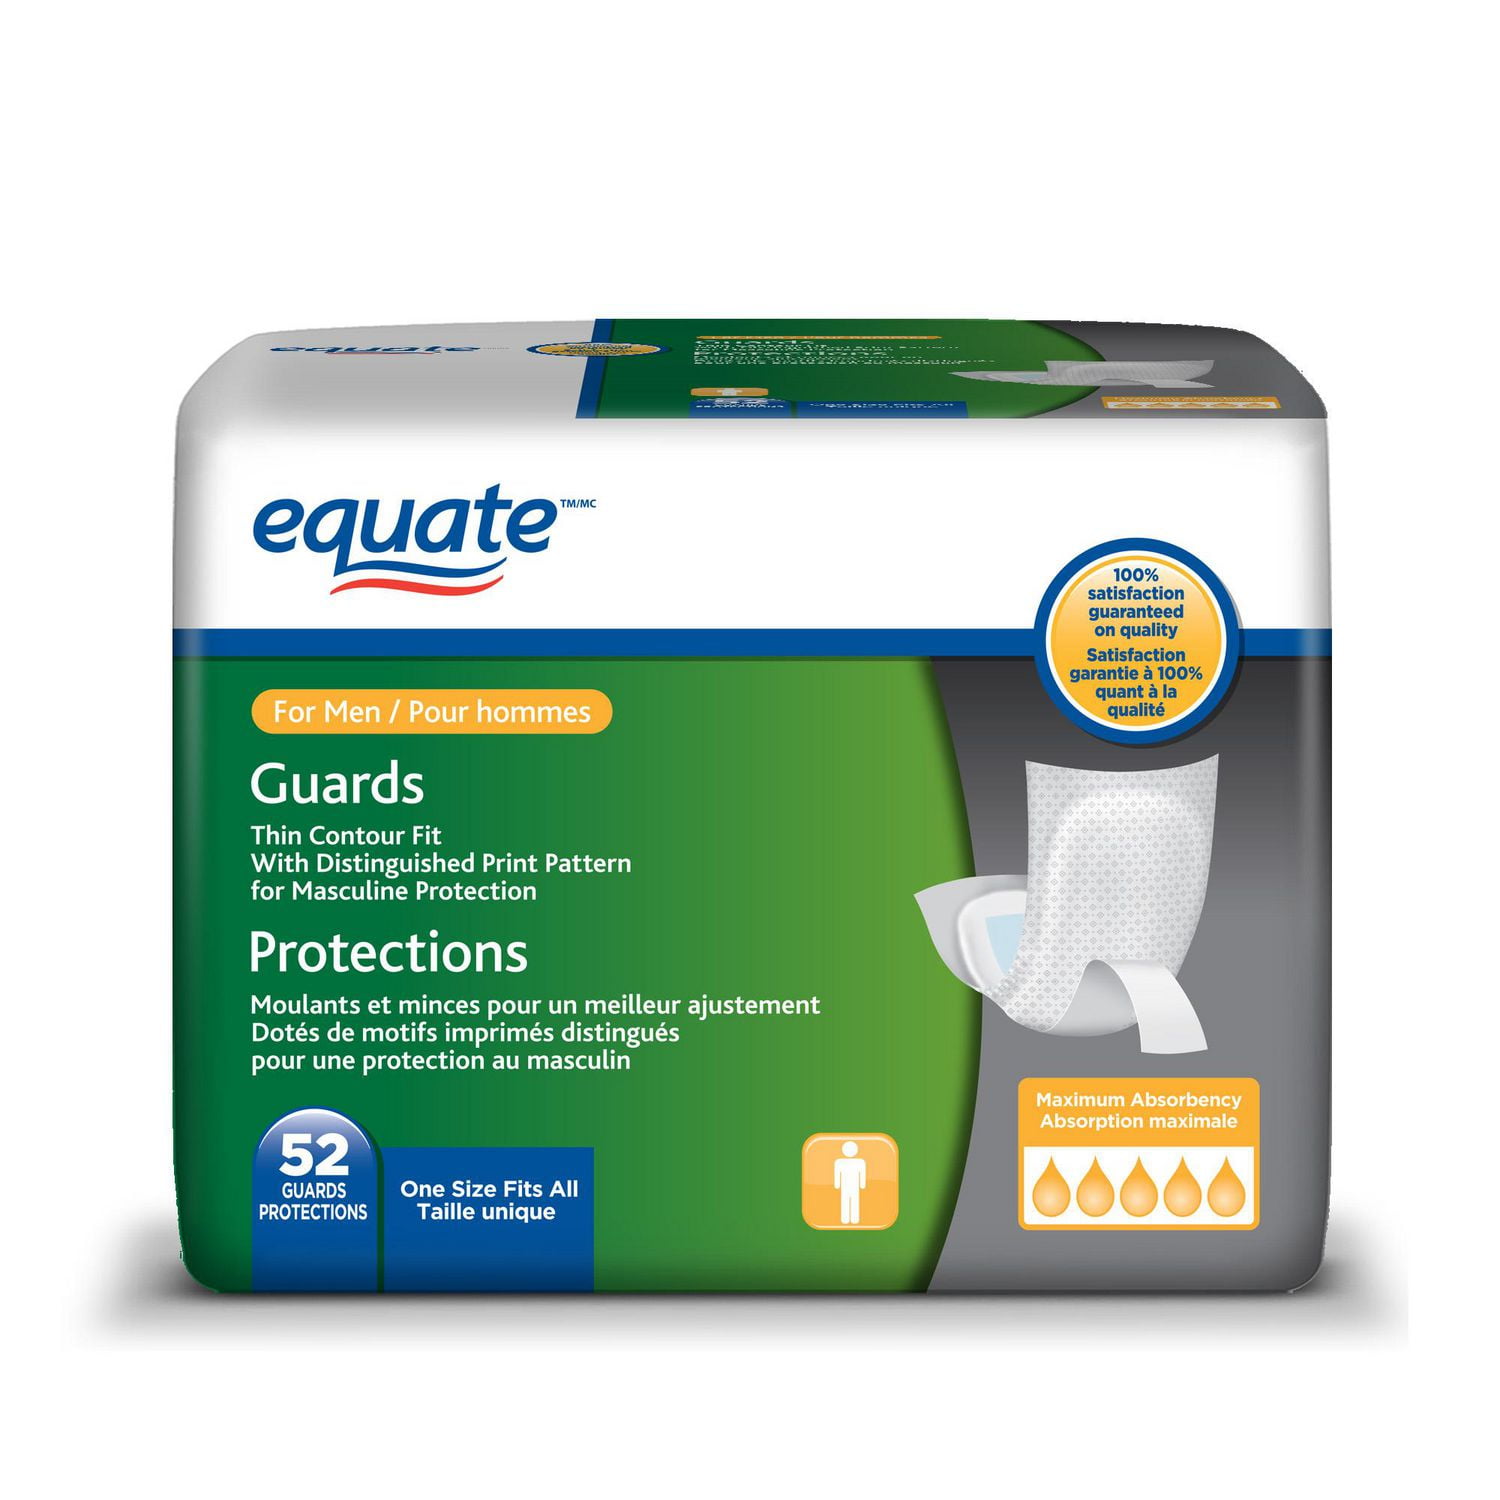 Free Equate or Assurance Liner & Pad Sample Kits - Free Product